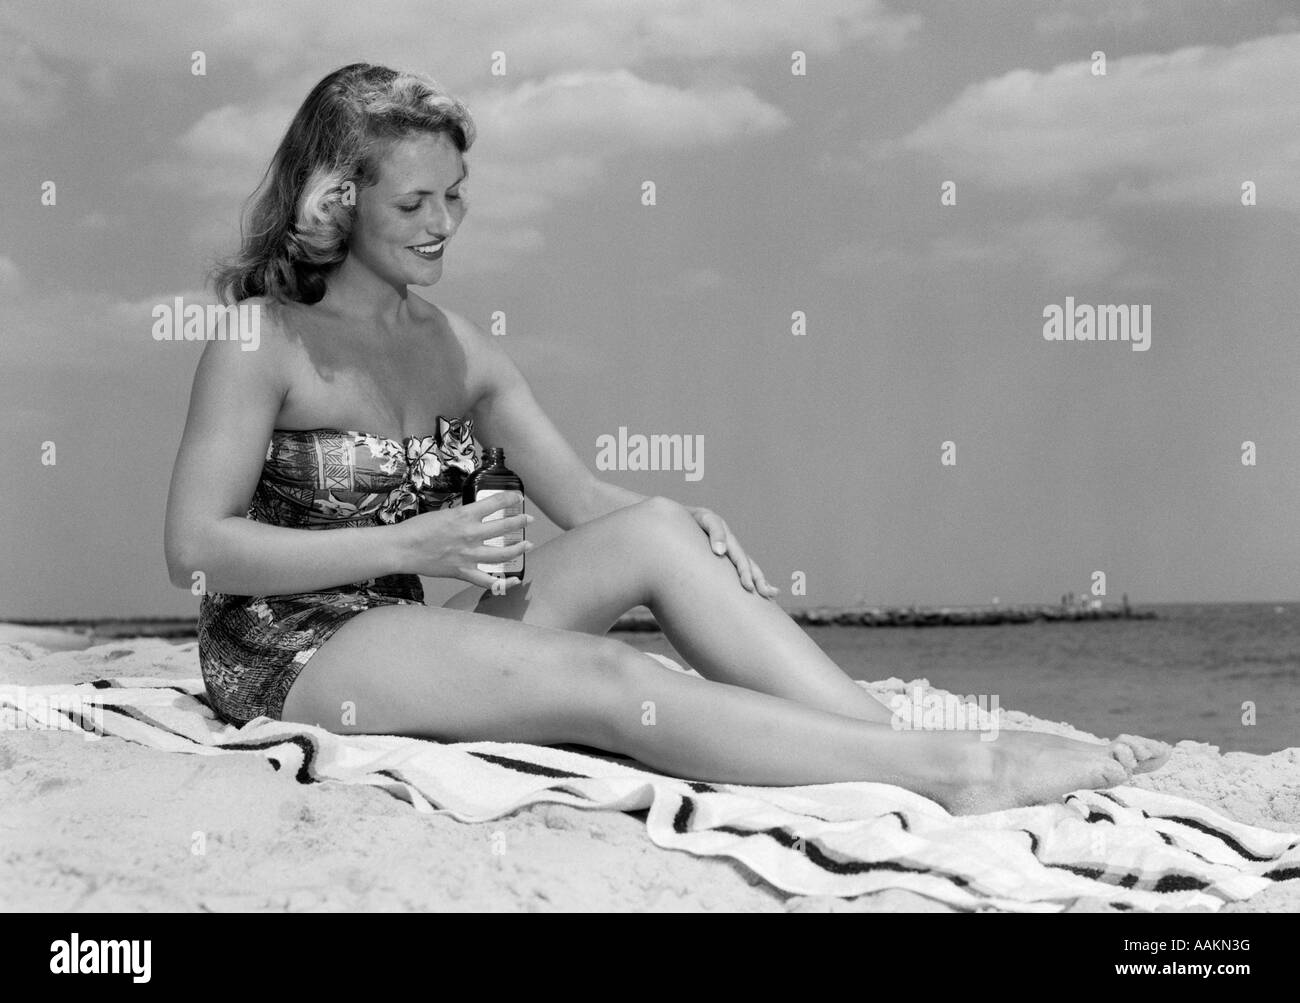 1950s WOMAN IN STRAPLESS ONE-PIECE BATHING SUIT SEATED ON BEACH TOWEL PUTTING ON SUNTAN LOTION Stock Photo